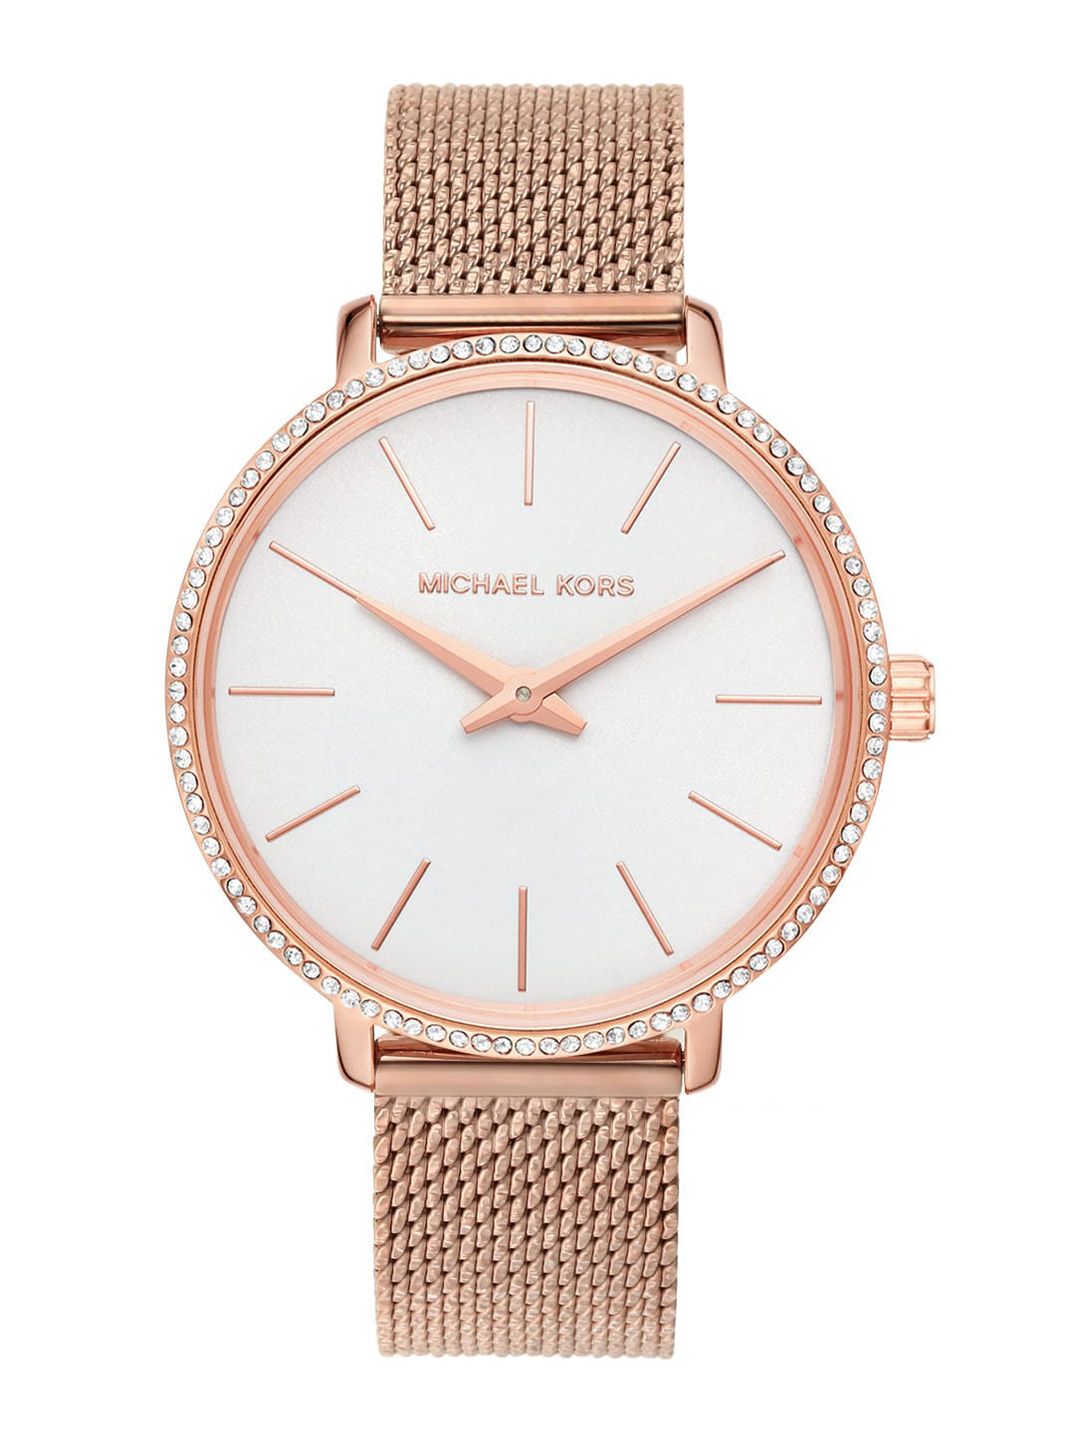 Michael Kors Women White Dial & Rose Gold-Plated Straps Analogue Watch MK4588 Price in India